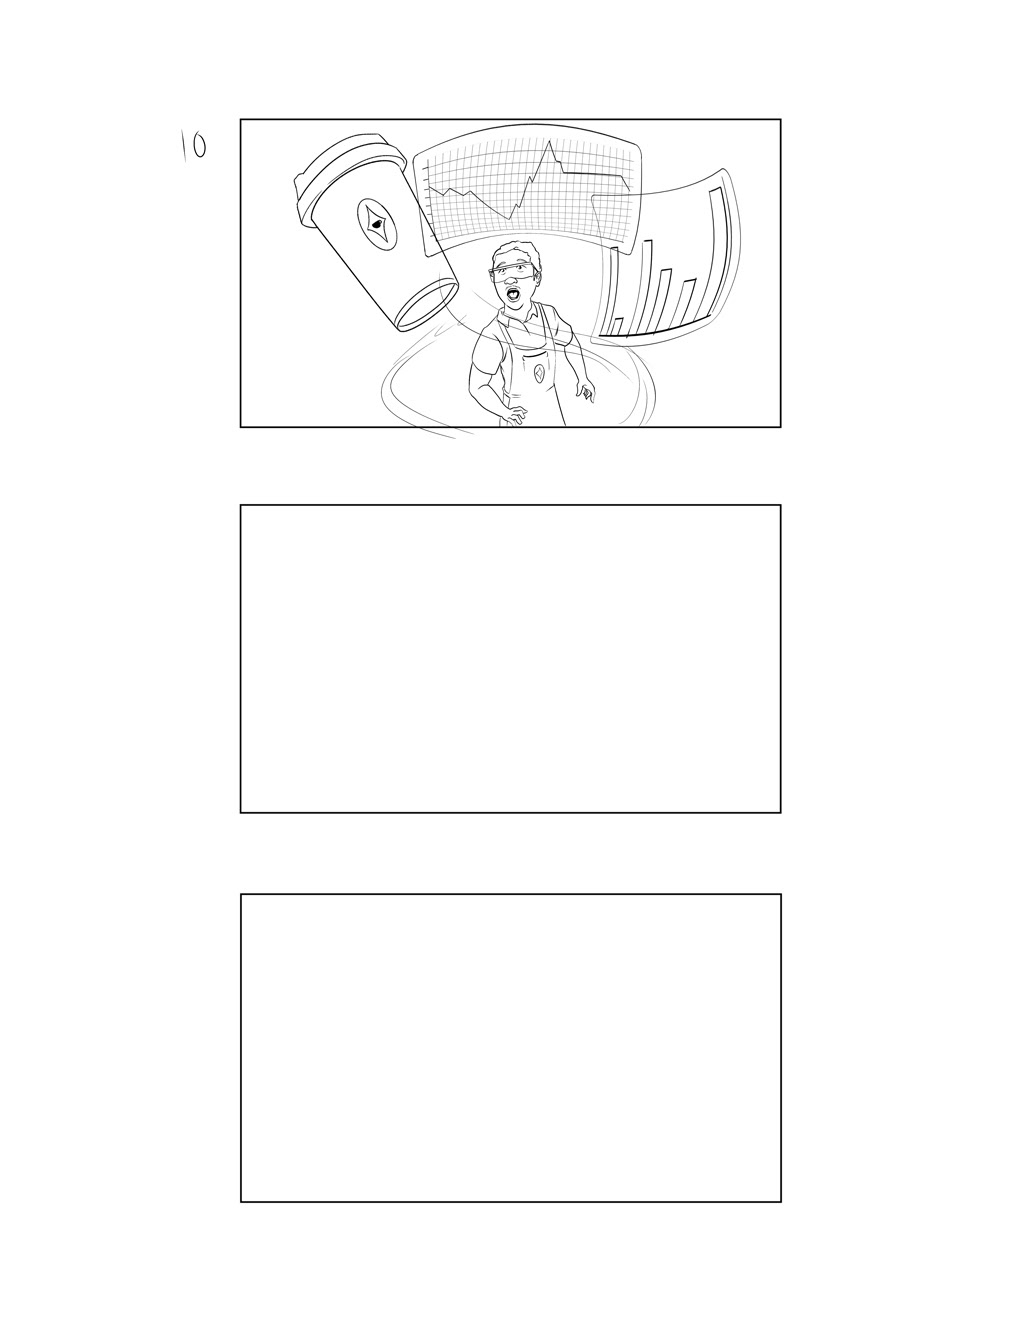 storyboarding   illustratoin cartoon augmented reality Technology product design  Product pitch